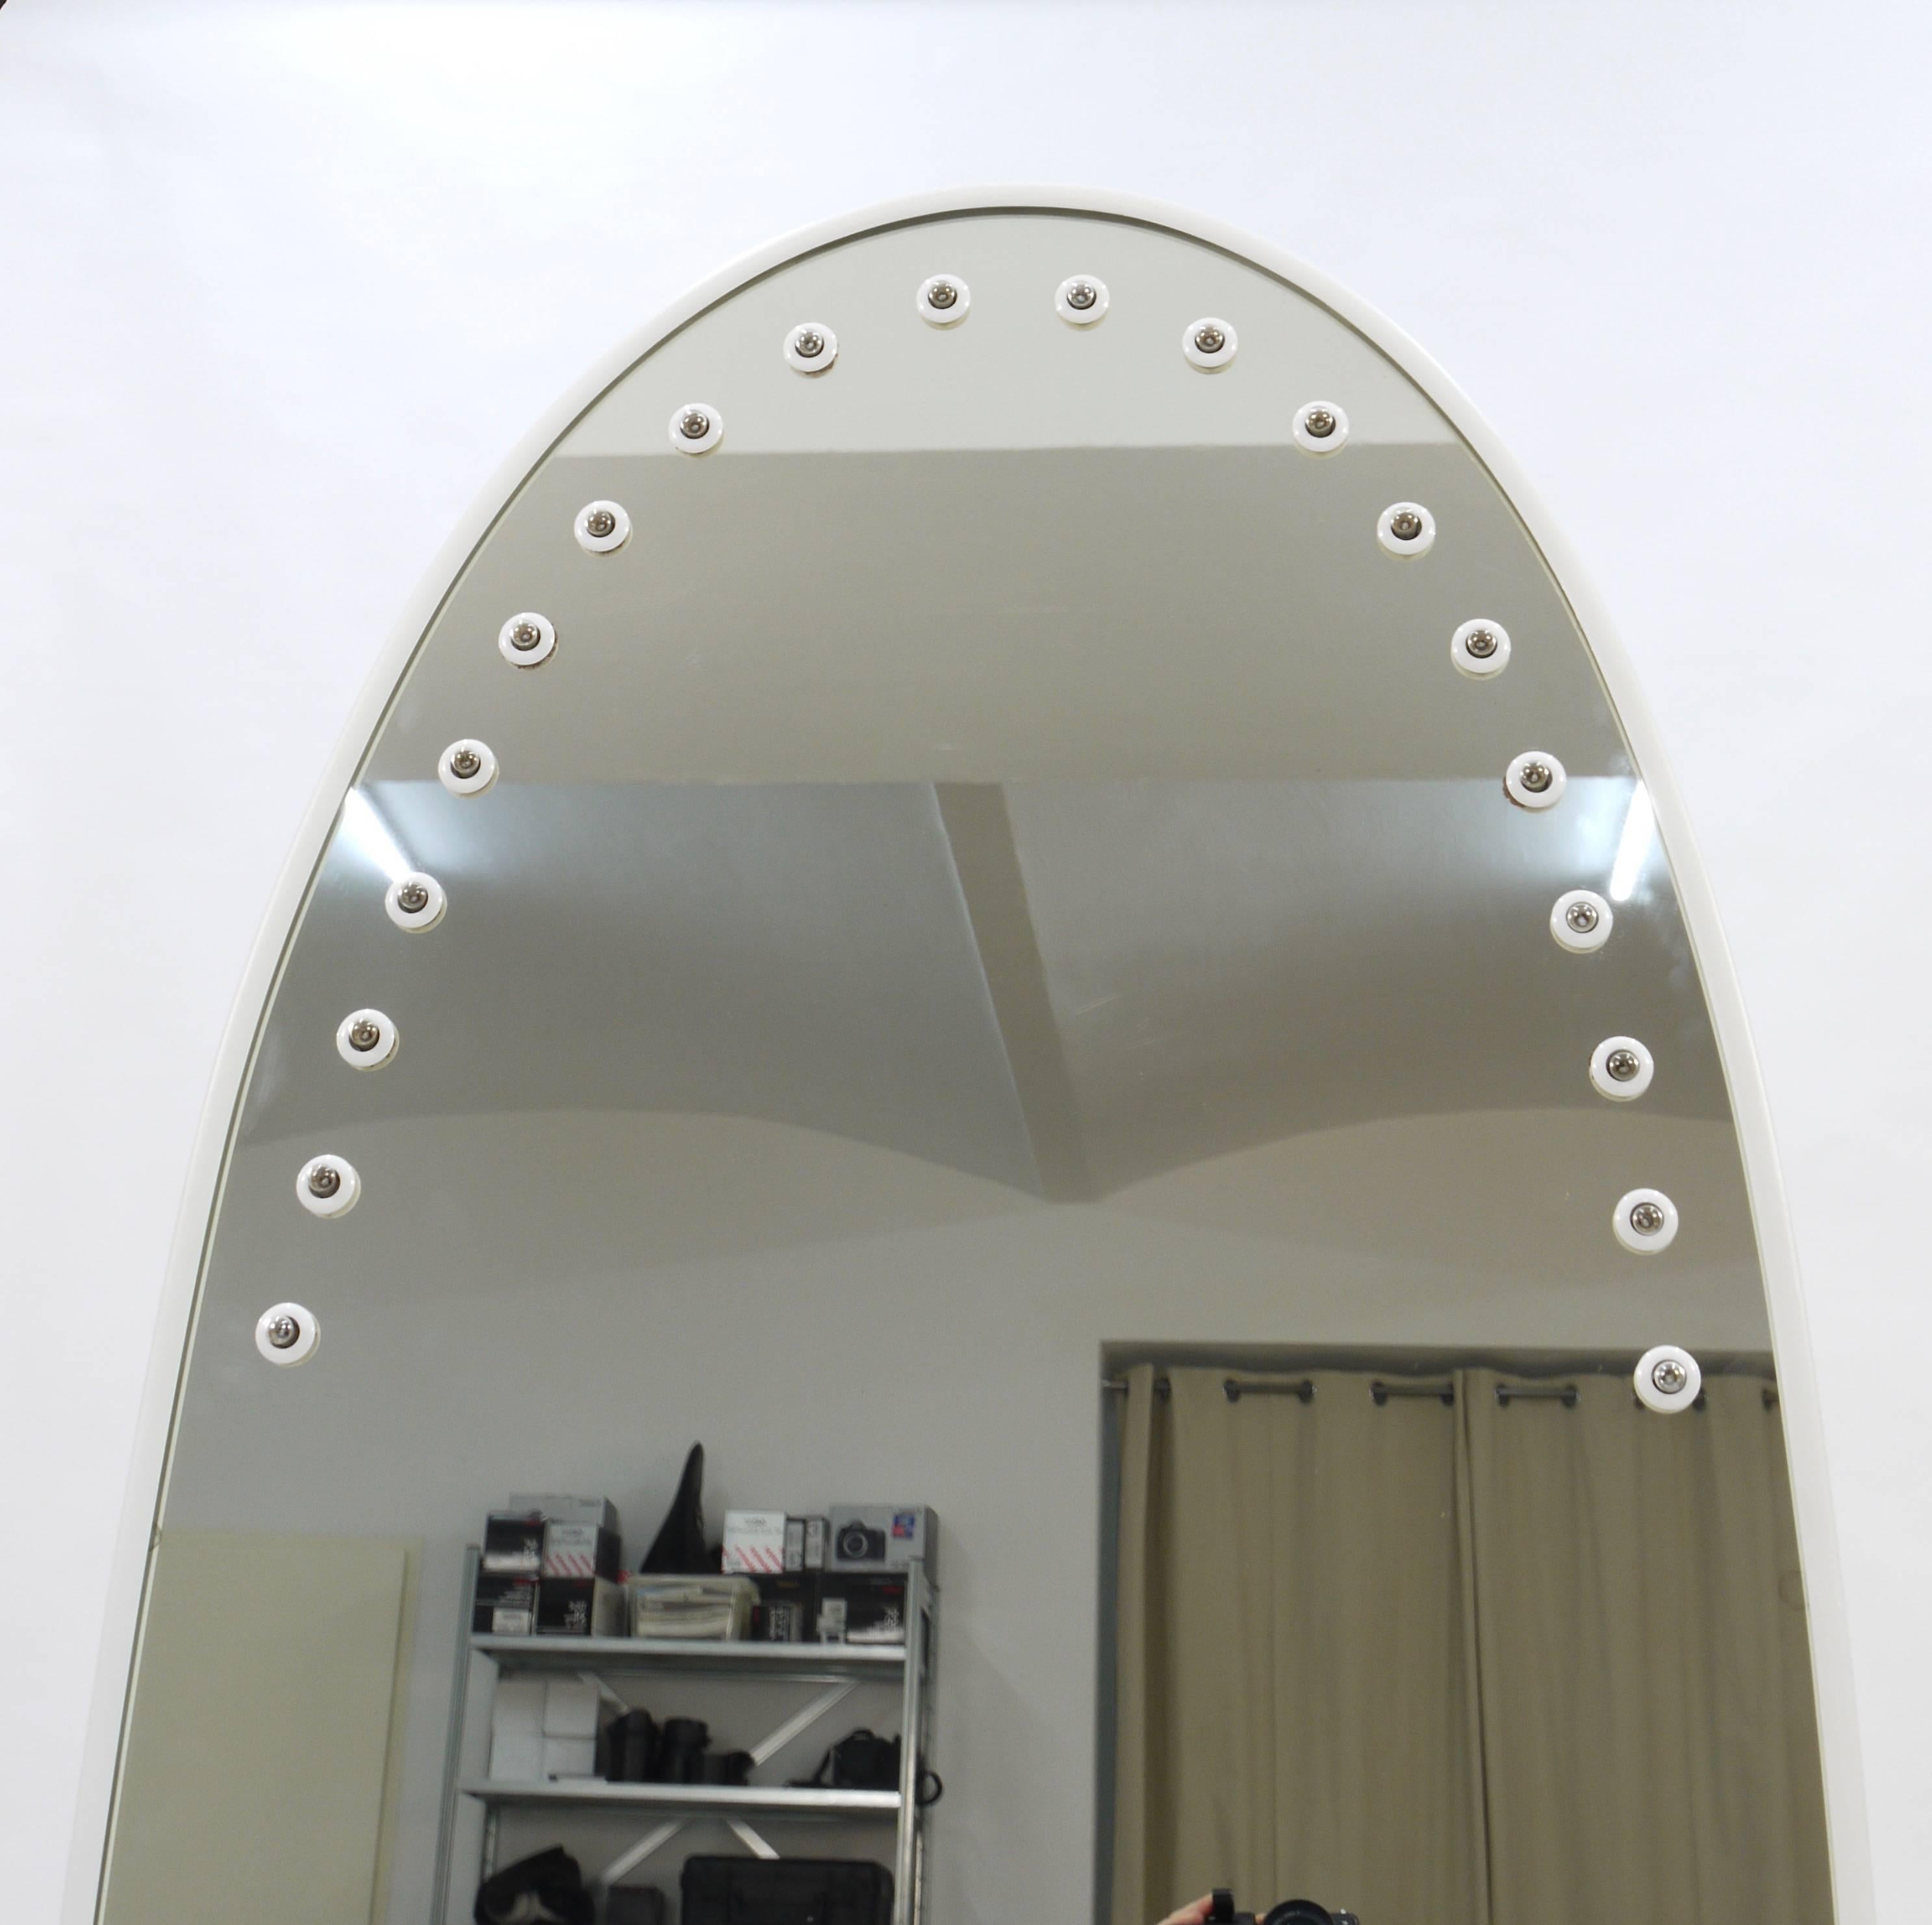 An elliptical full-length wall mirror with a white metal frame and integrated illumination, designed by Gino Sarfatti, executed by Arteluce, Italy in the 1970s. Excellent condition.